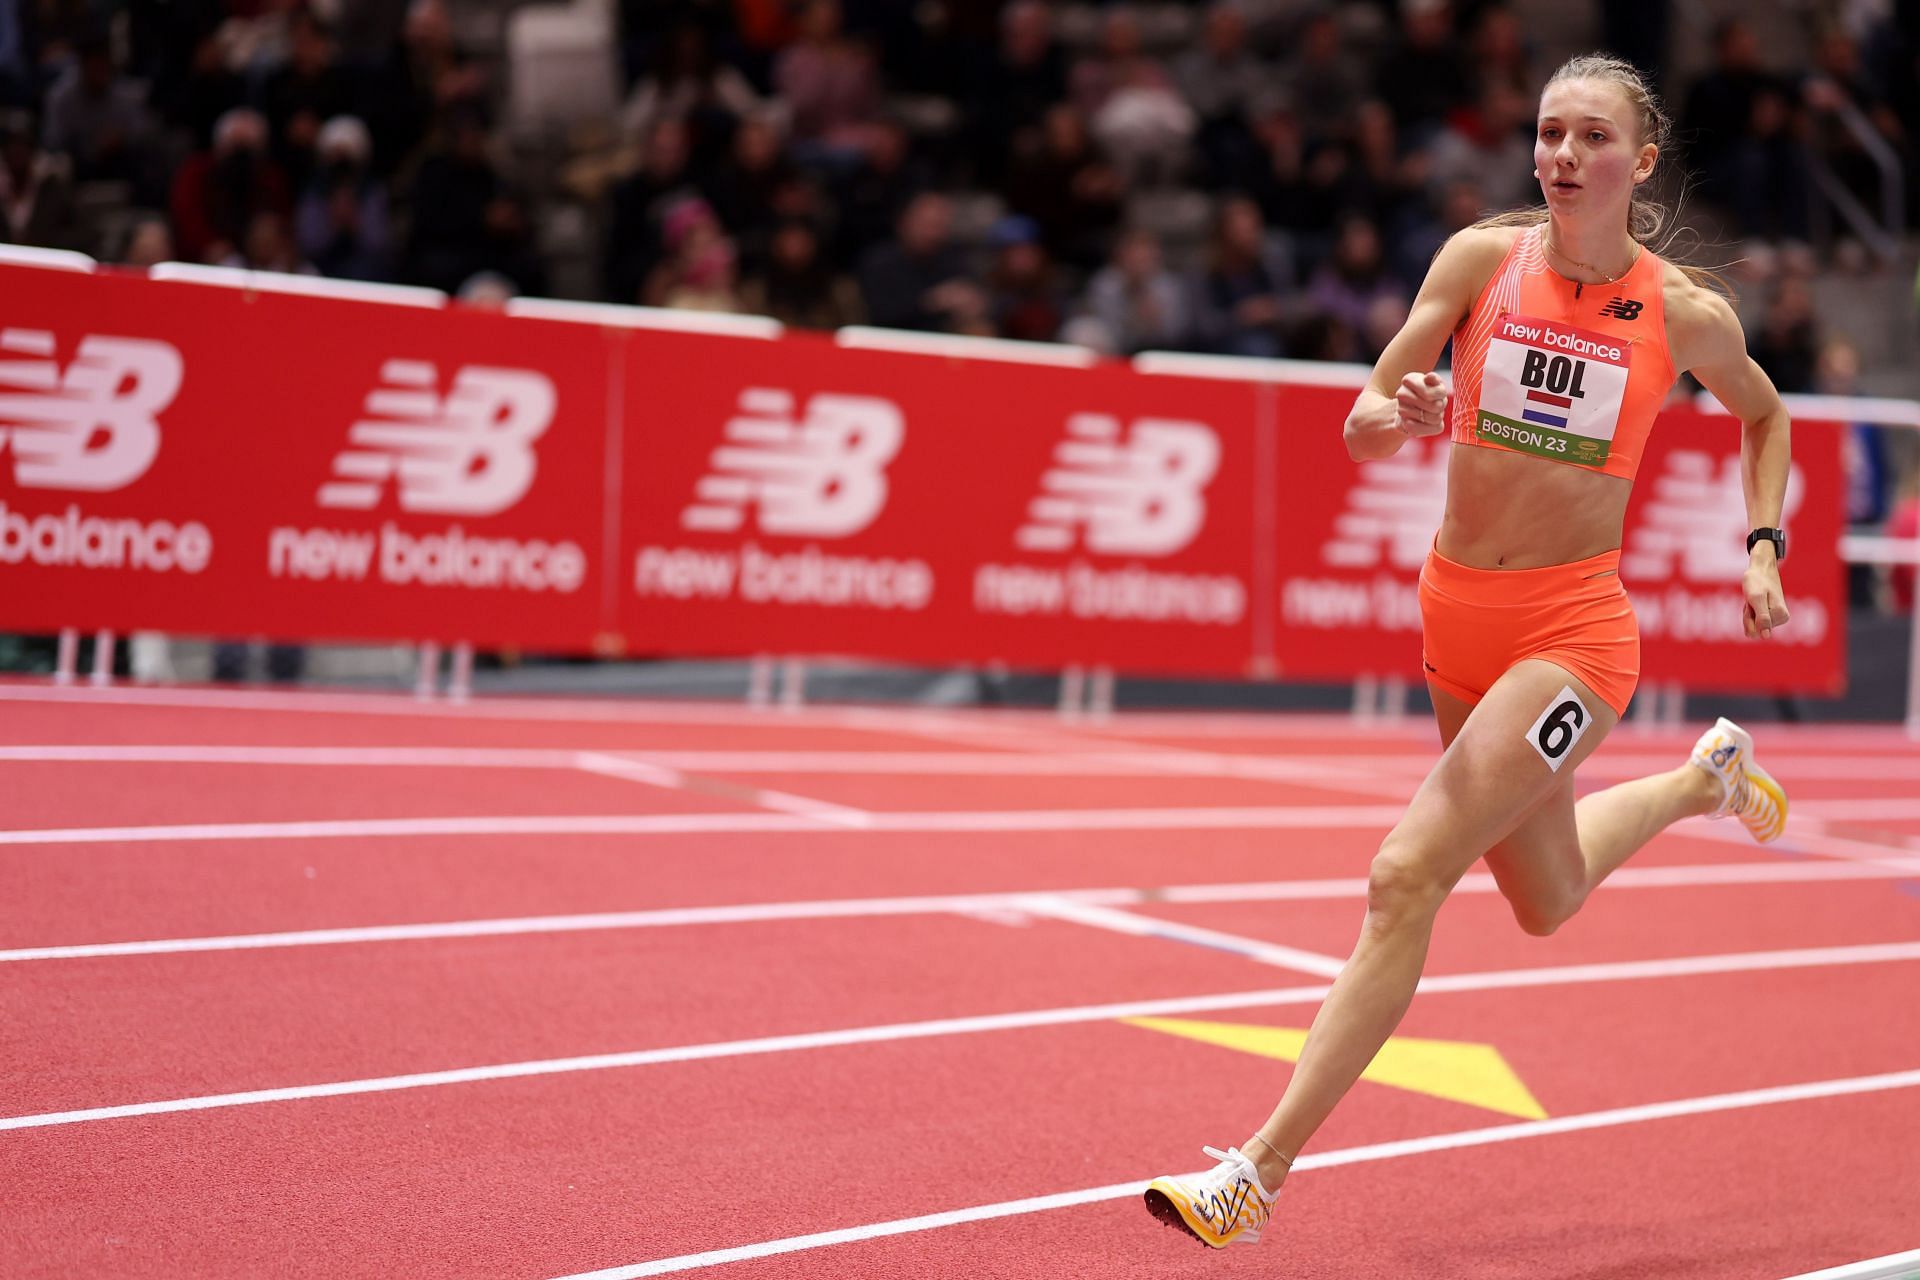 Femke Bol will also be in action at the indoor meeting. (Photo by Maddie Meyer/Getty Images)